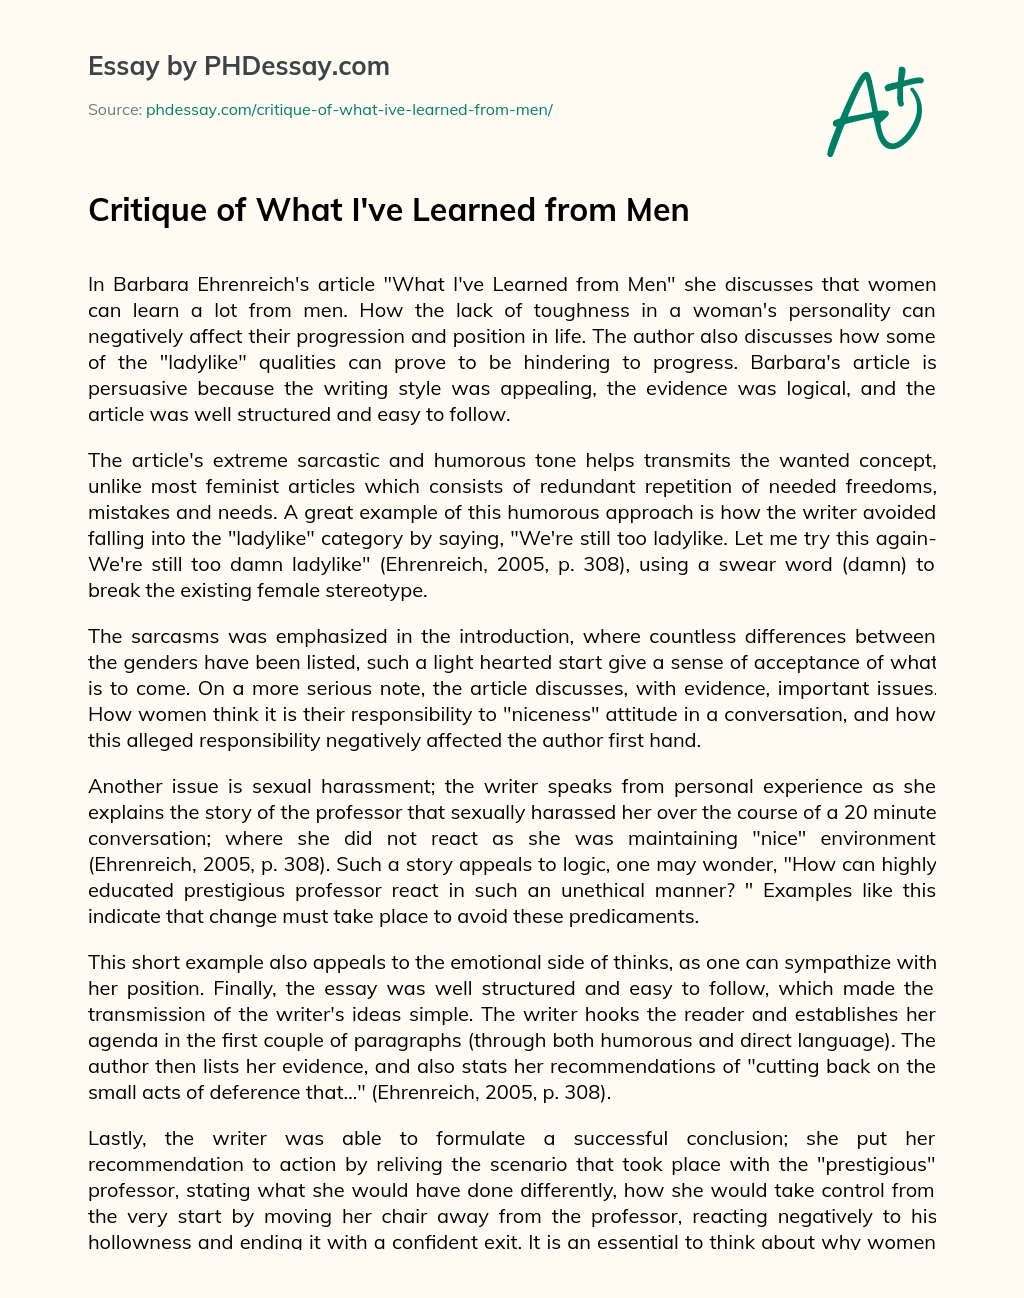 Critique of What I’ve Learned from Men essay